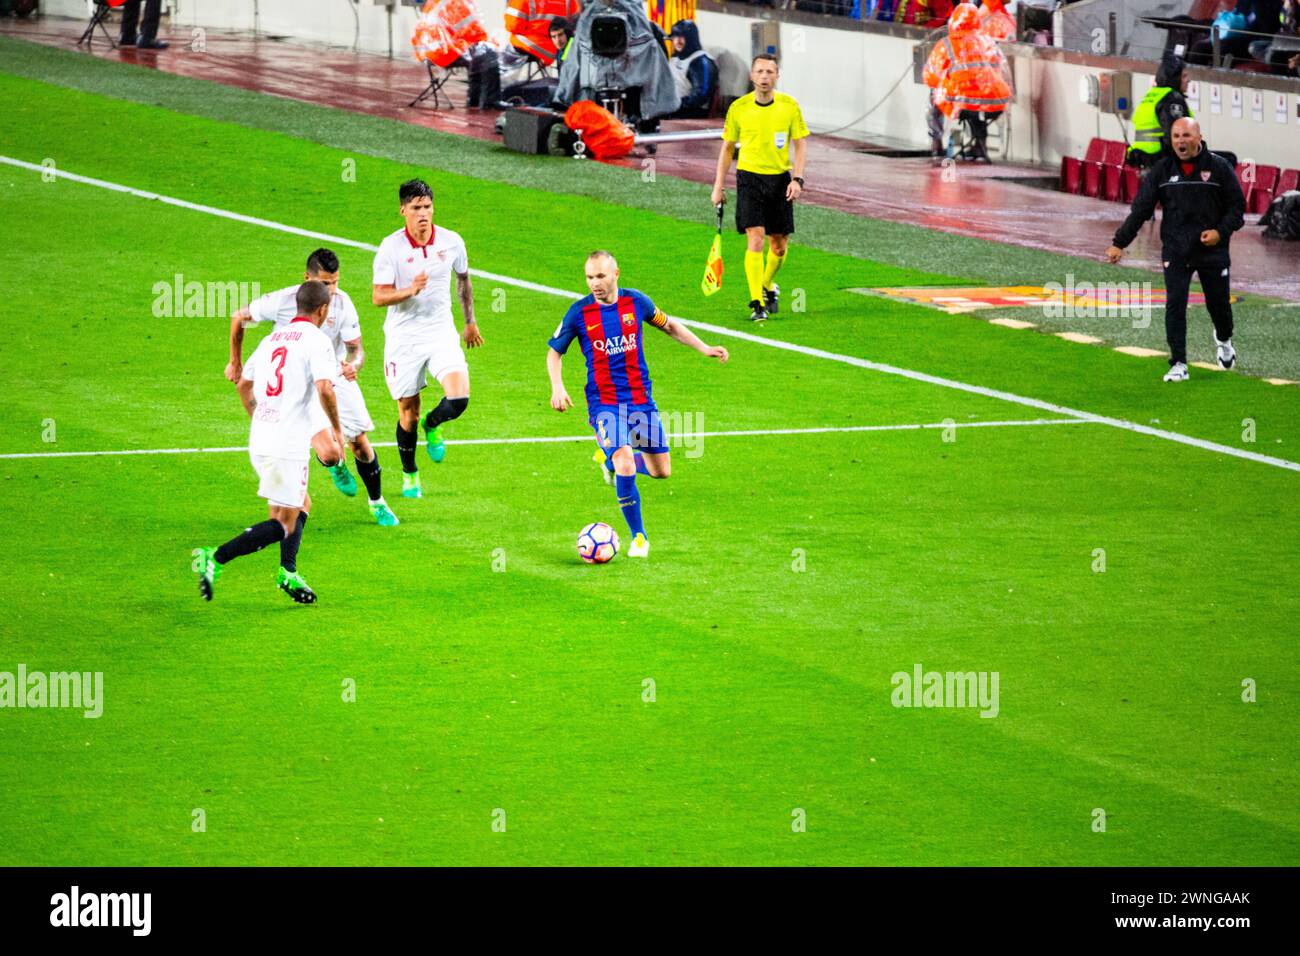 INIESTA, BARCELONA FC, 2017: Andrés Iniesta is attacking from midfield. Barcelona FC v Sevilla FC at Camp Nou, Barcelona on 5 April 2017. Photo: Rob Watkins. Barca won the game 3-0 with three goals in the first 33 minutes. The game was played in a deluge of rain during a massive spring storm. Stock Photo